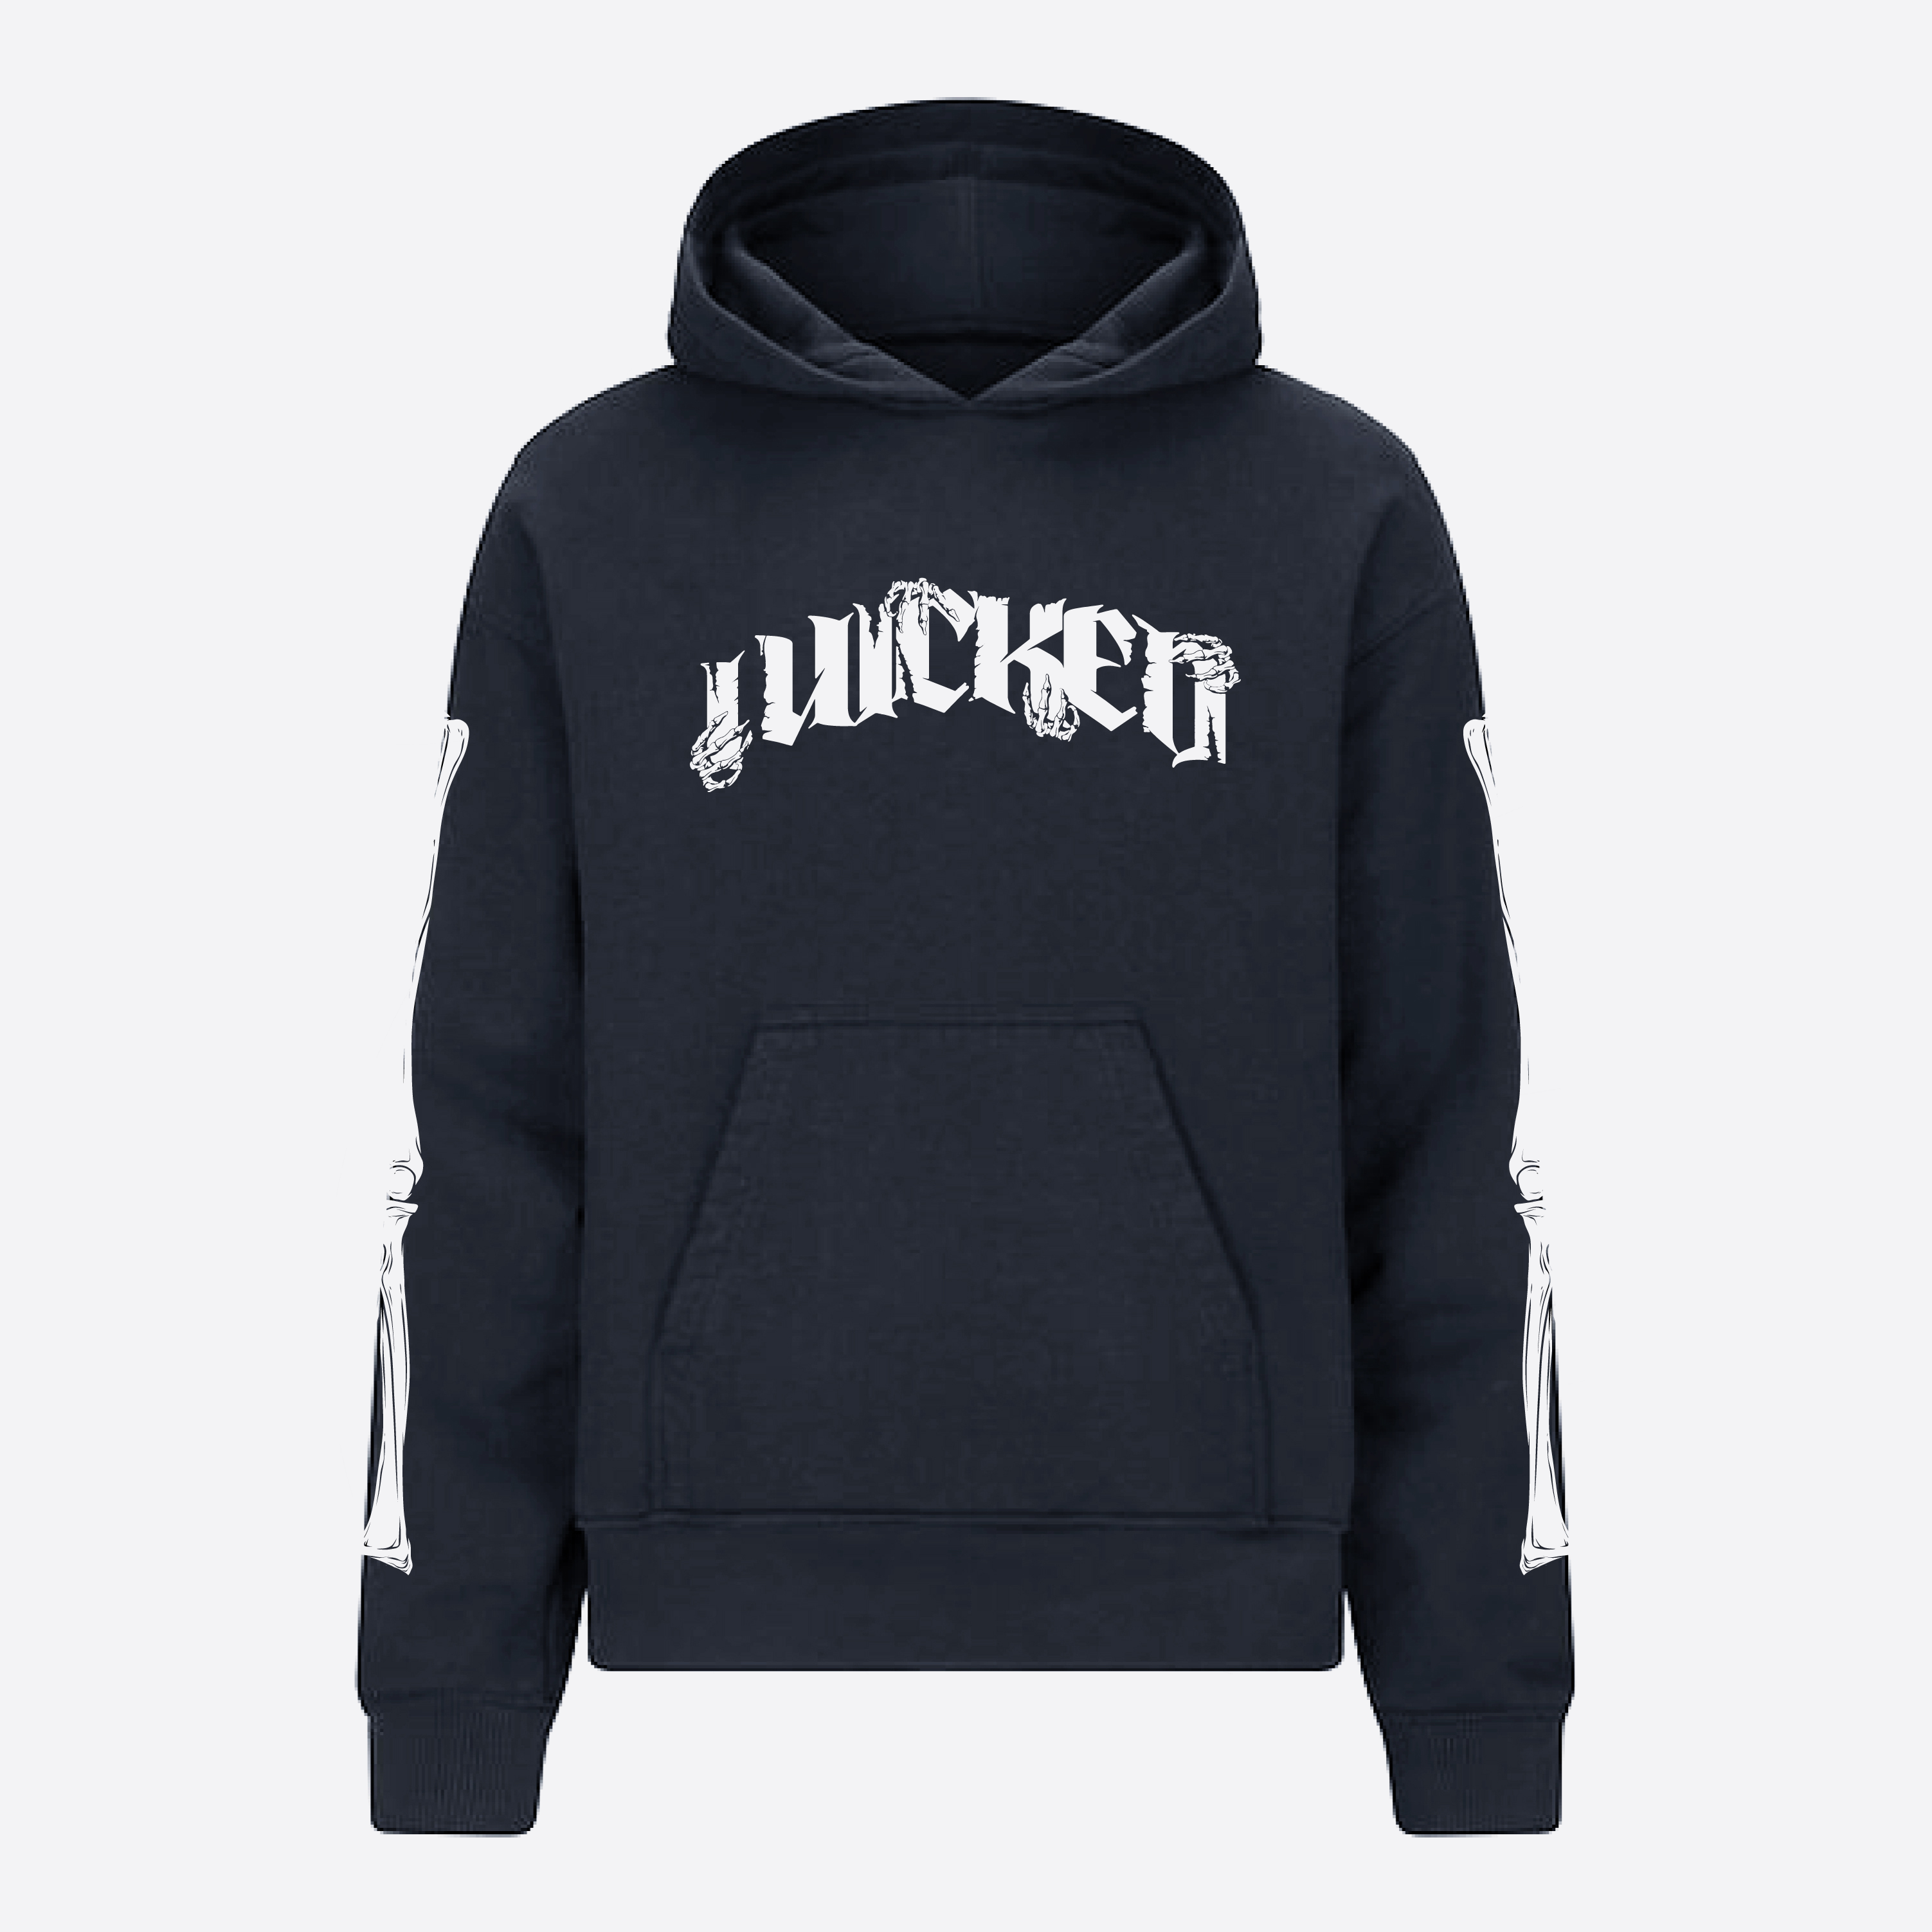 "BACK FROM THE DEAD" HOODIE (BLACK)